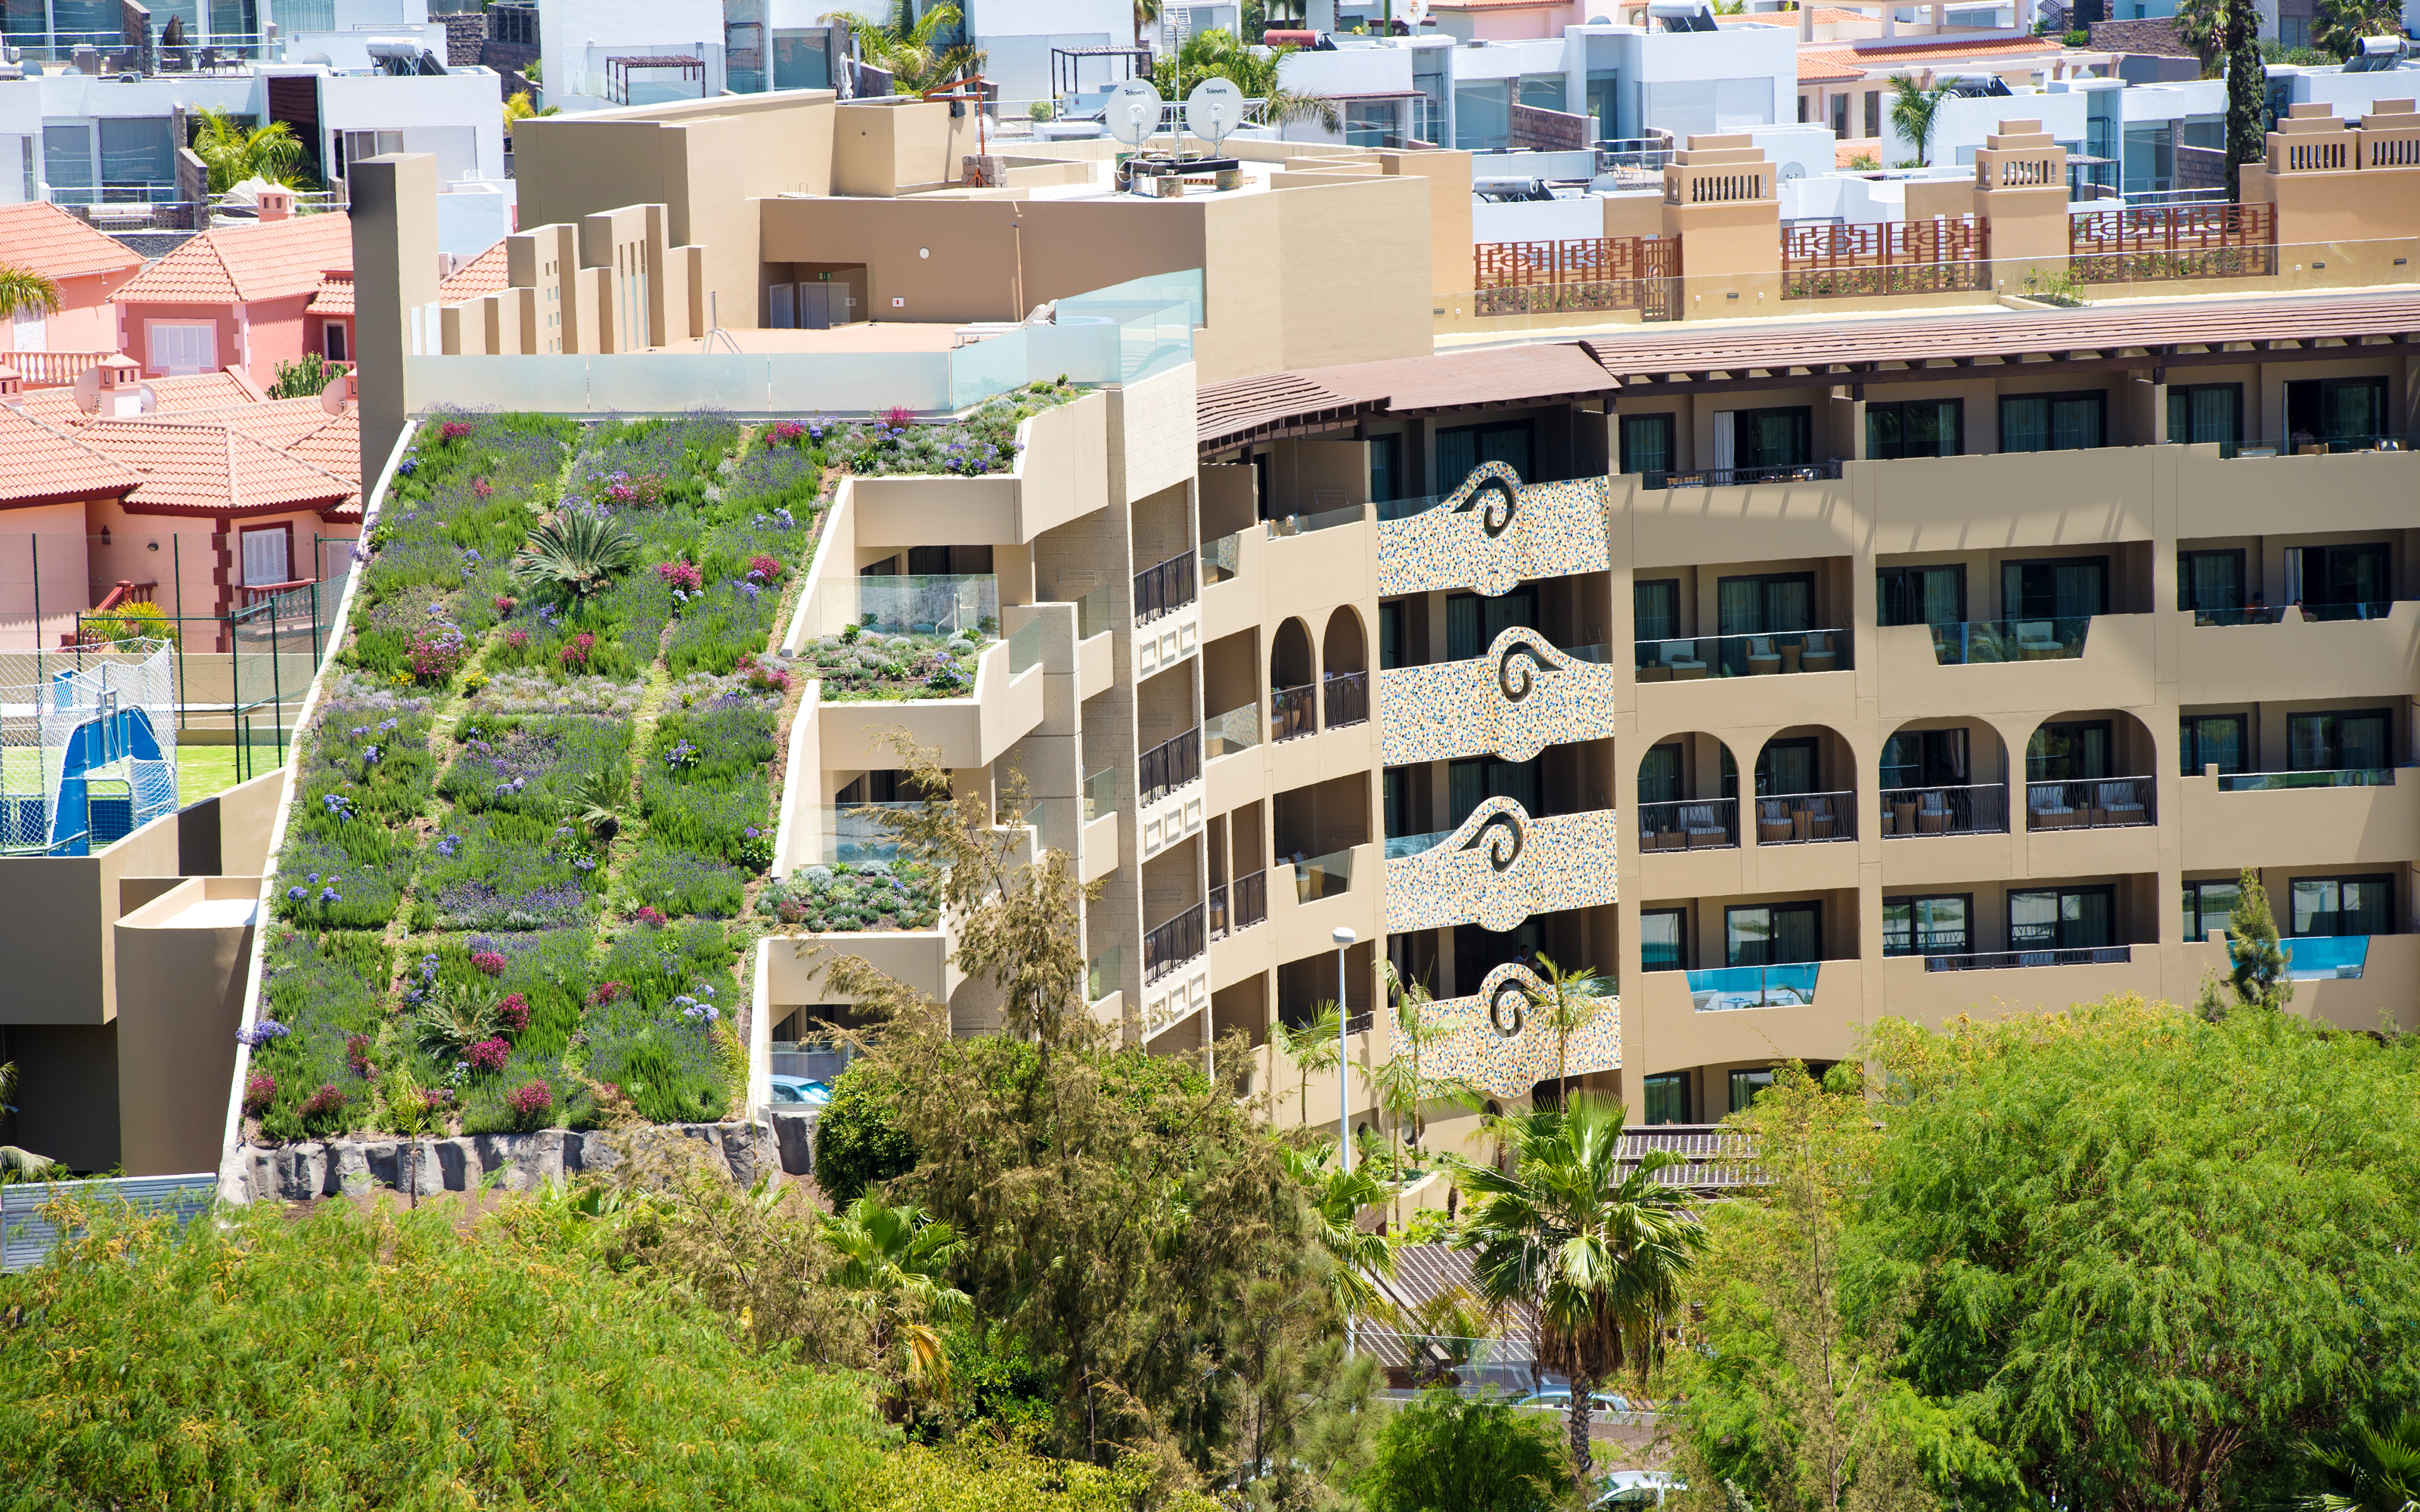 Hotel building with steep pitched green roof